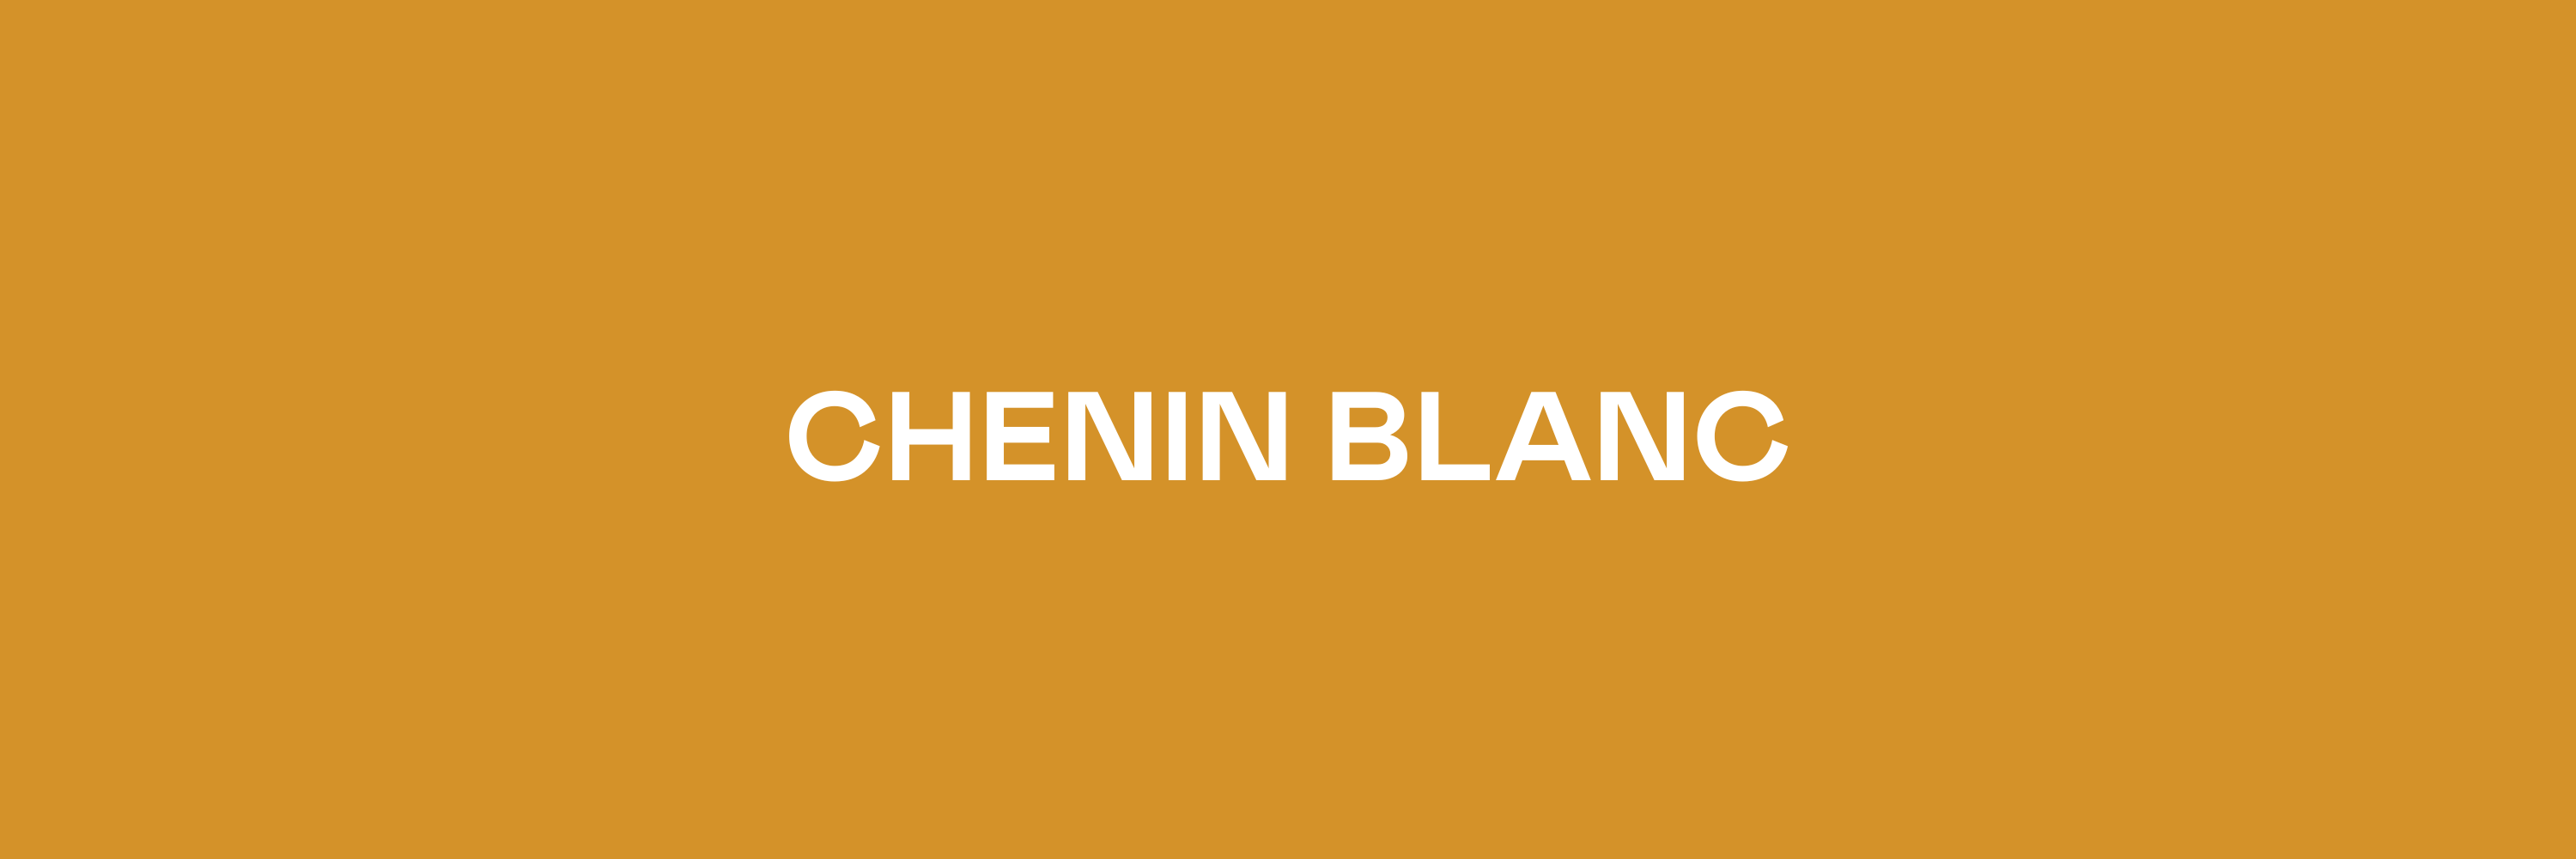 Why You Should Drink More Chenin Blanc's Article Visual